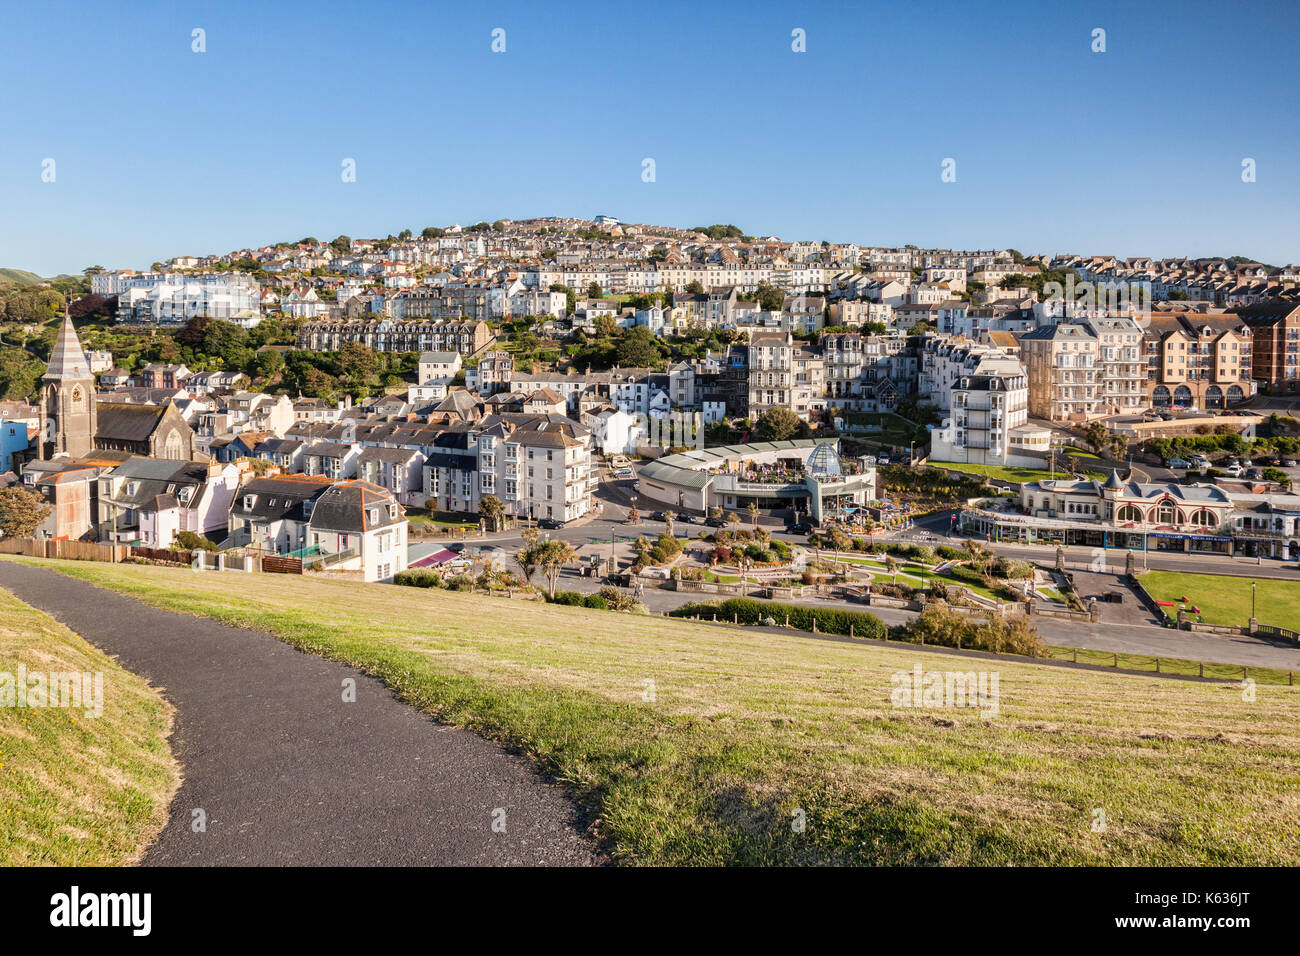 17 June 2017: Ilfracombe, North Devon, England, UK - A view over the town from Capstone Hill. Stock Photo